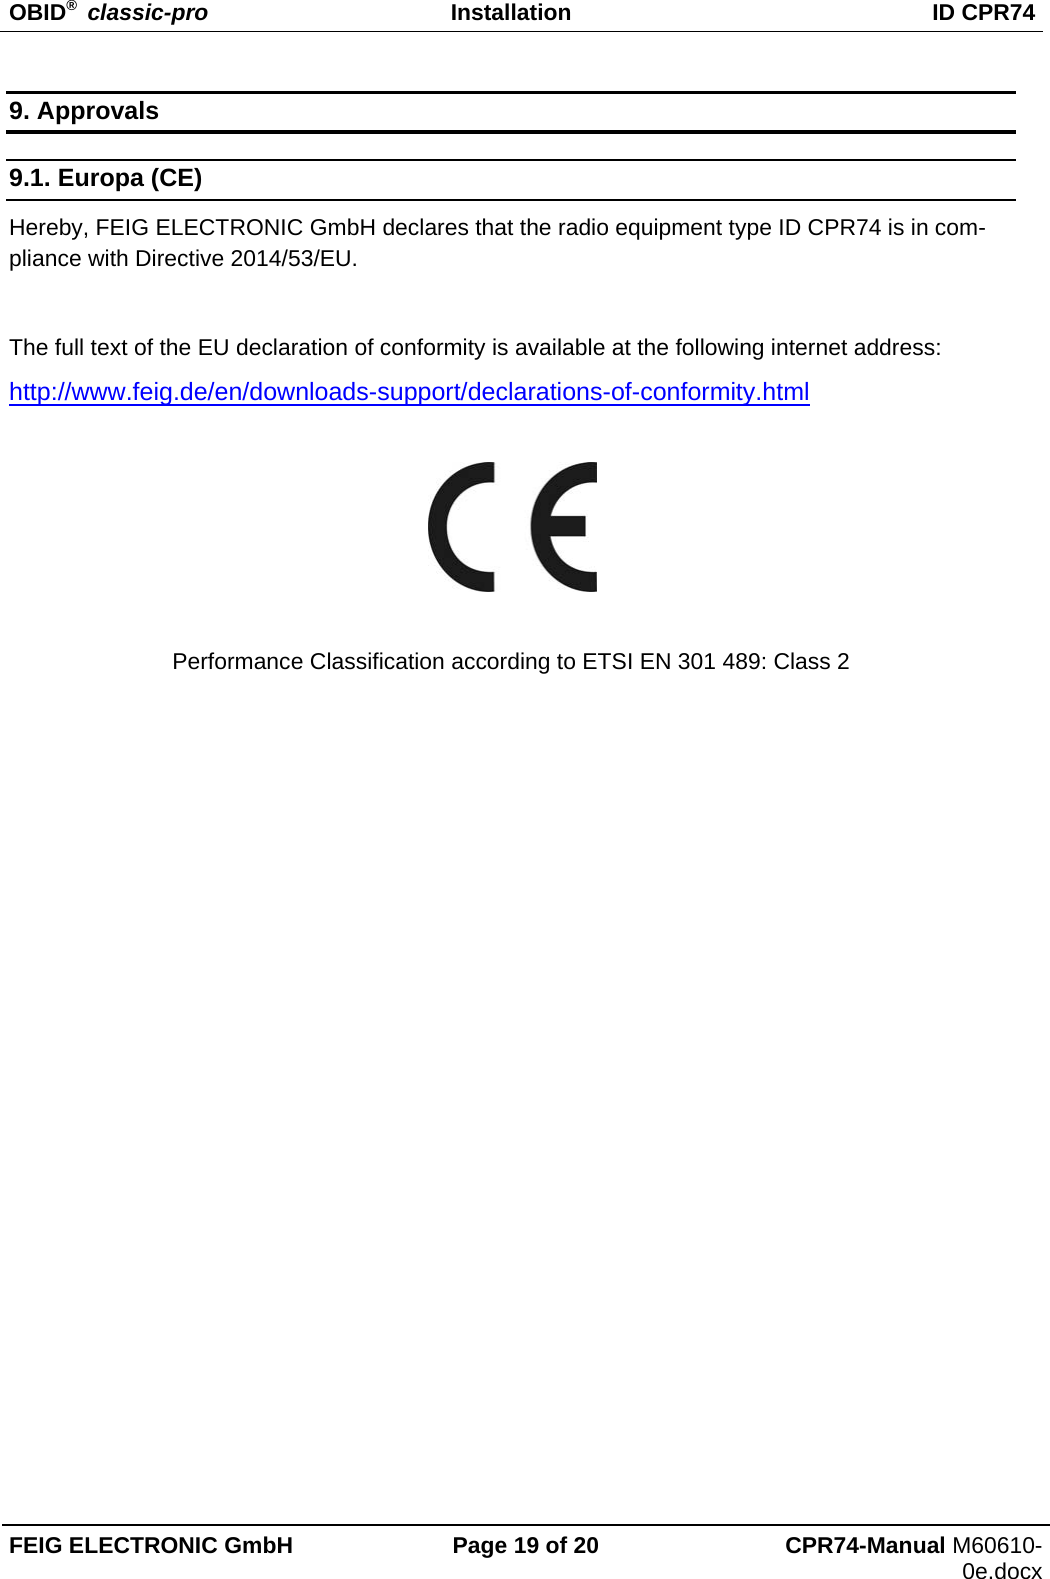 OBID®  classic-pro Installation  ID CPR74 FEIG ELECTRONIC GmbH  Page 19 of 20  CPR74-Manual M60610-0e.docx 9. Approvals 9.1. Europa (CE) Hereby, FEIG ELECTRONIC GmbH declares that the radio equipment type ID CPR74 is in com-pliance with Directive 2014/53/EU.   The full text of the EU declaration of conformity is available at the following internet address: http://www.feig.de/en/downloads-support/declarations-of-conformity.html    Performance Classification according to ETSI EN 301 489: Class 2    